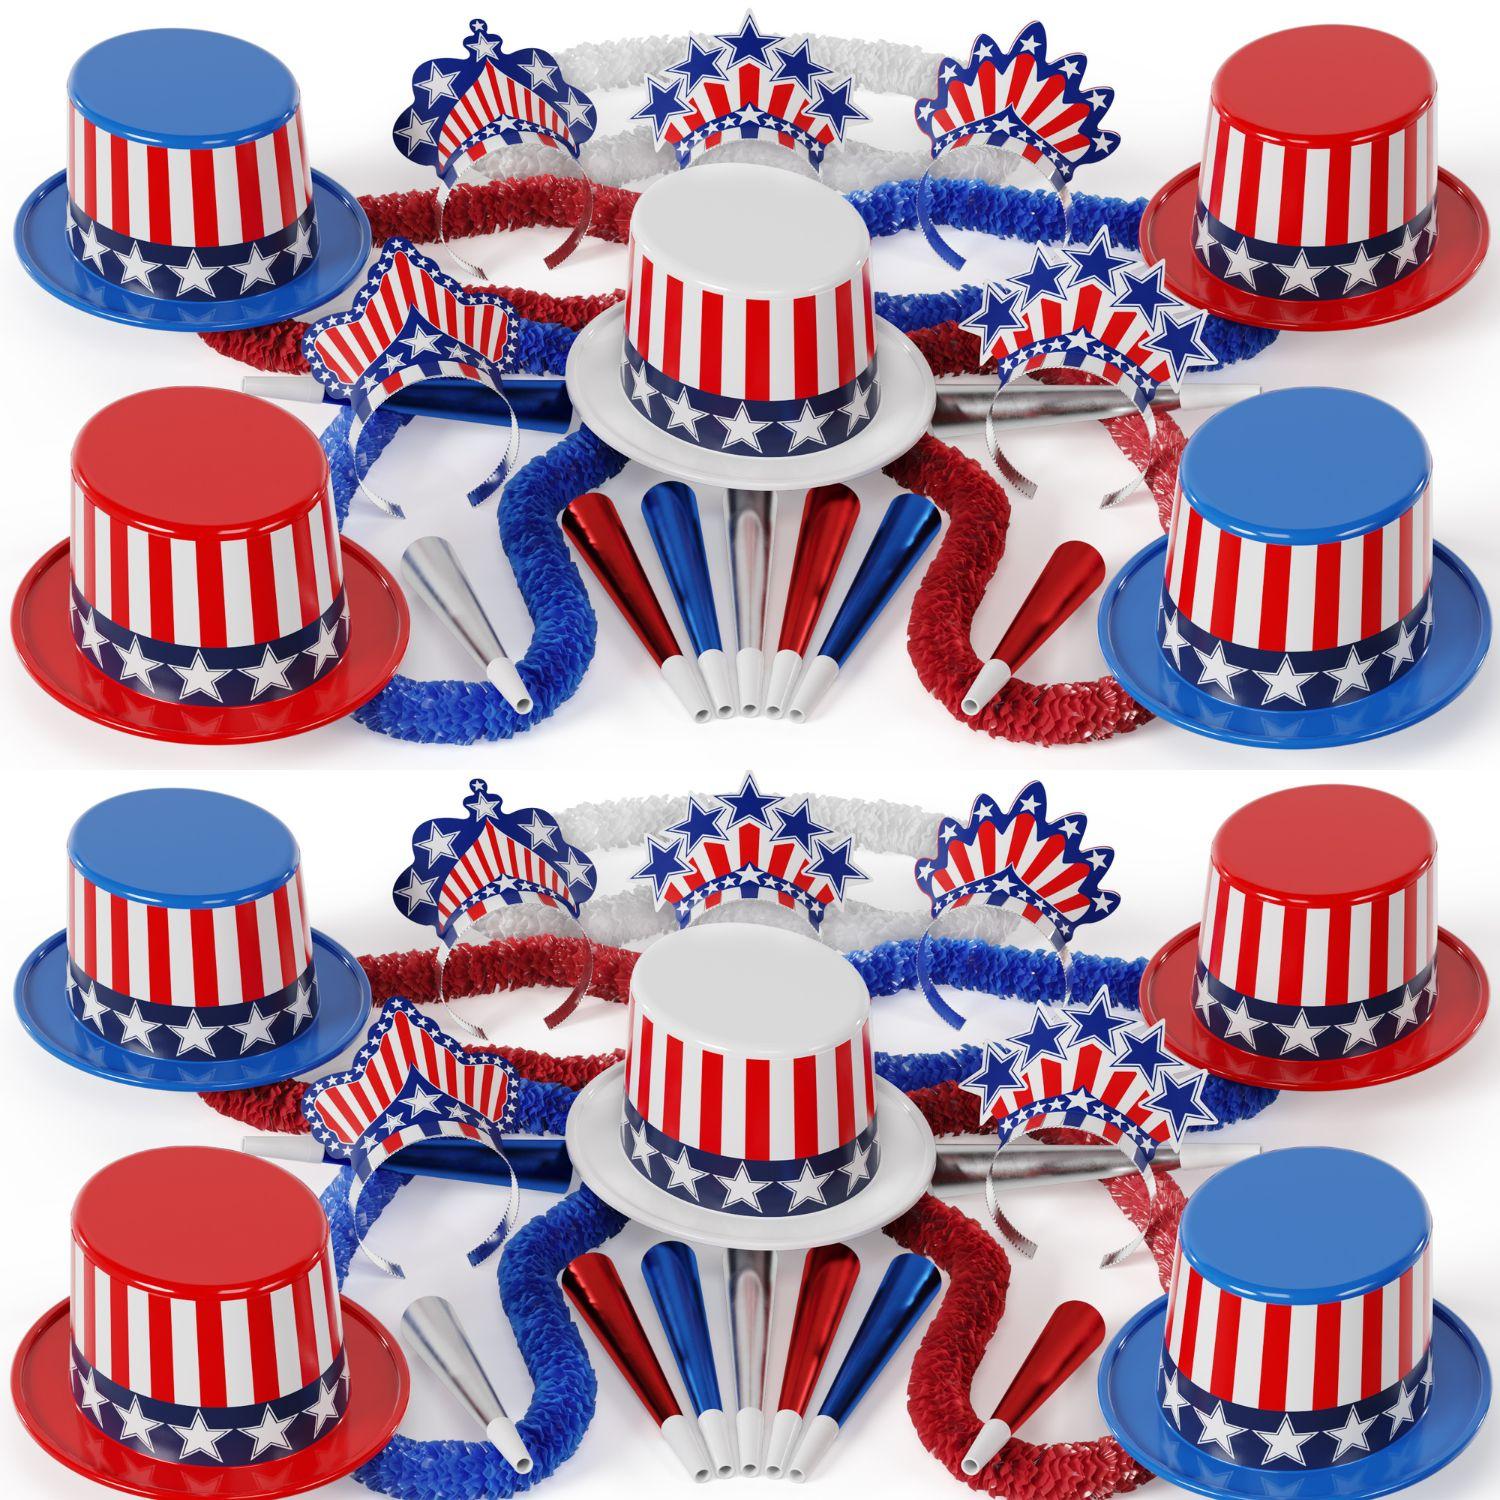 USA Party Kit for 100